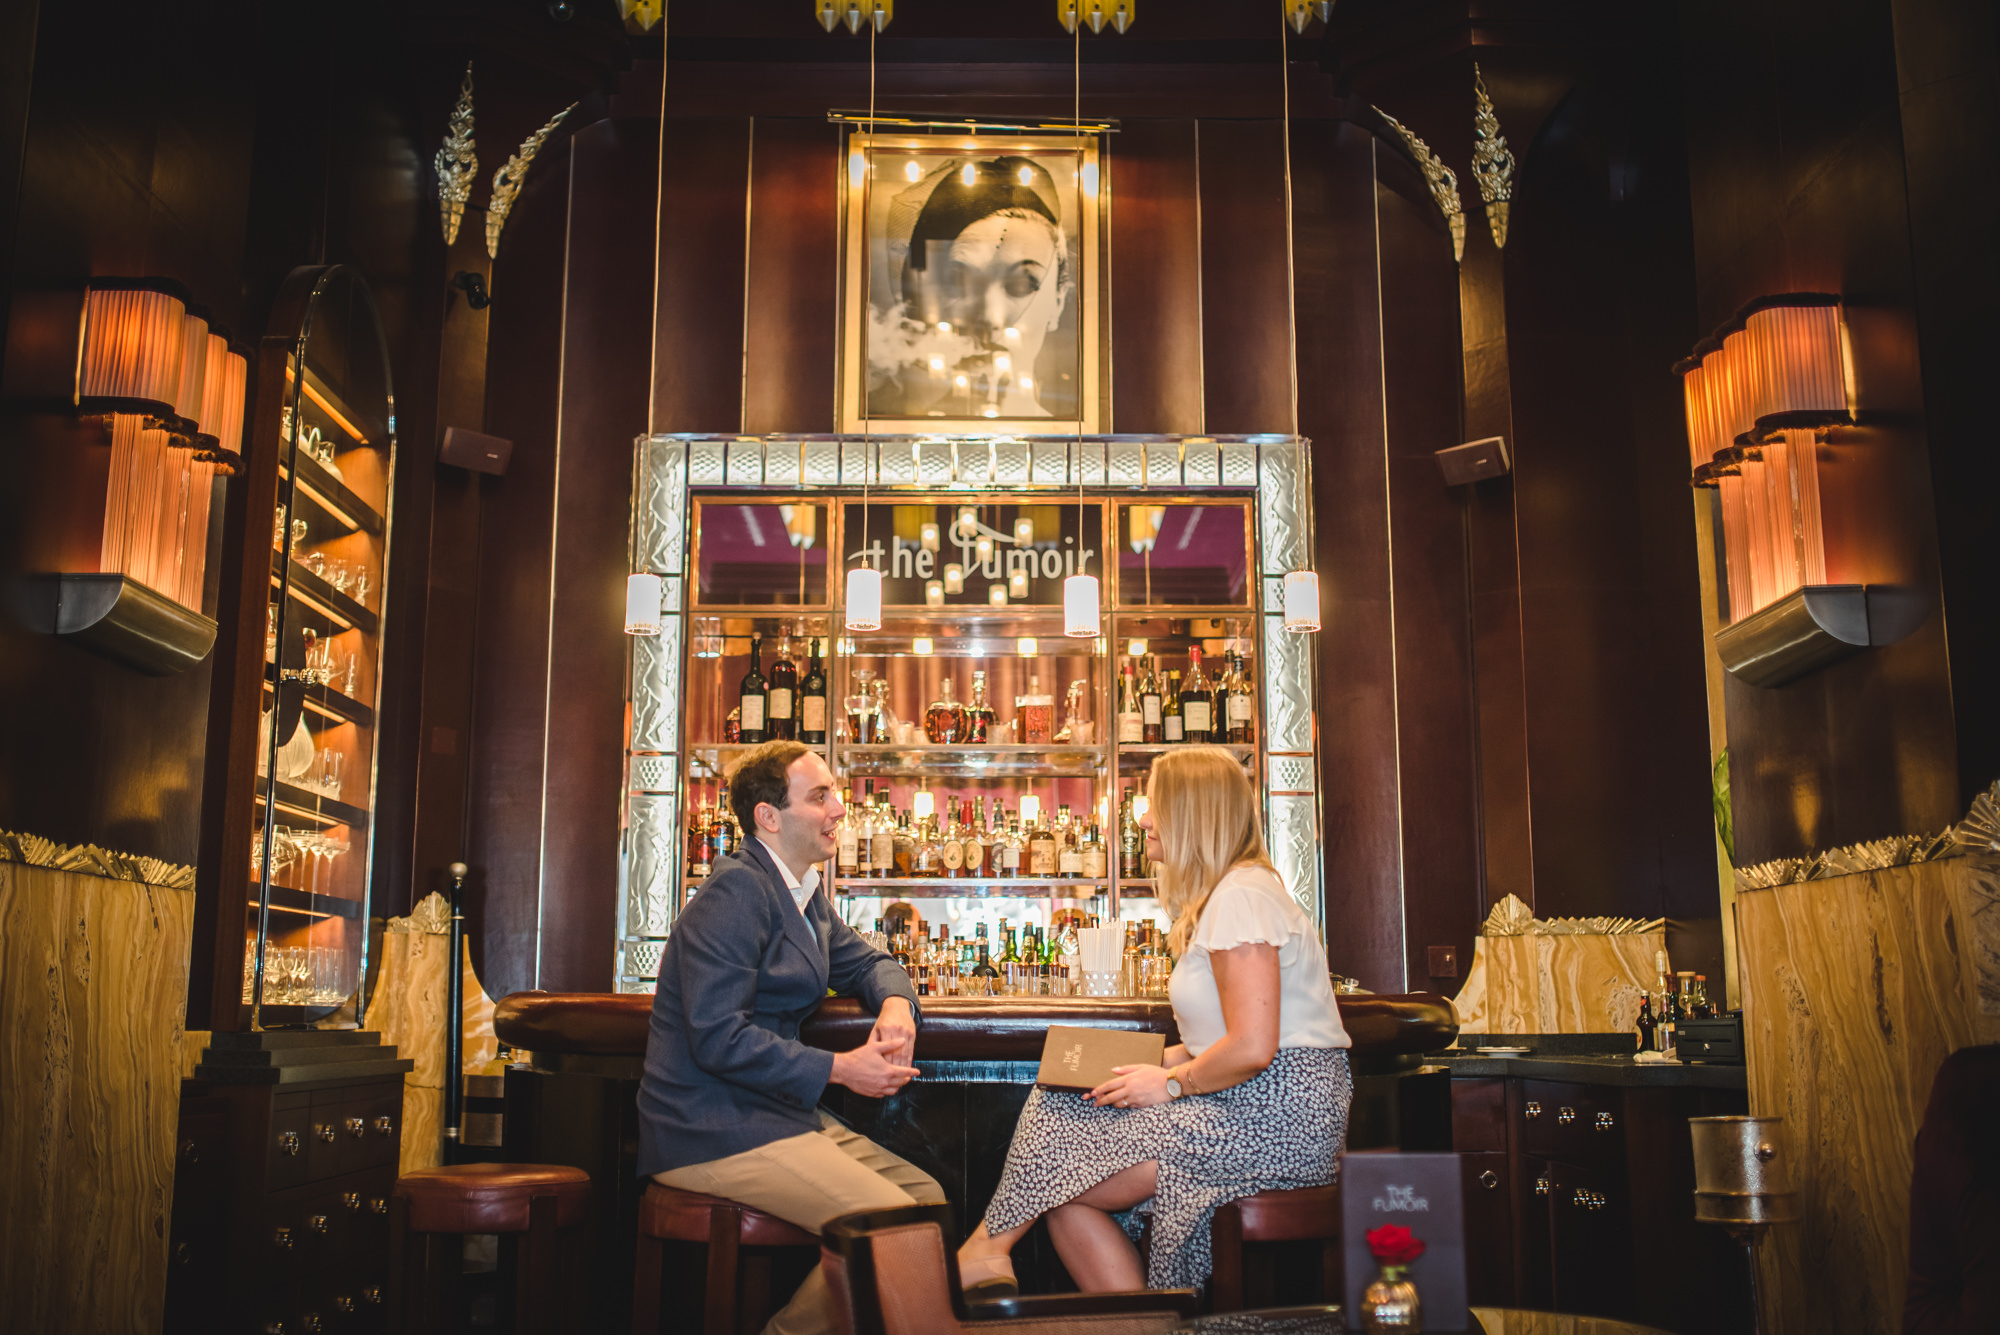 Engagement Photography in The Fumoir at Claridges Hotel London.